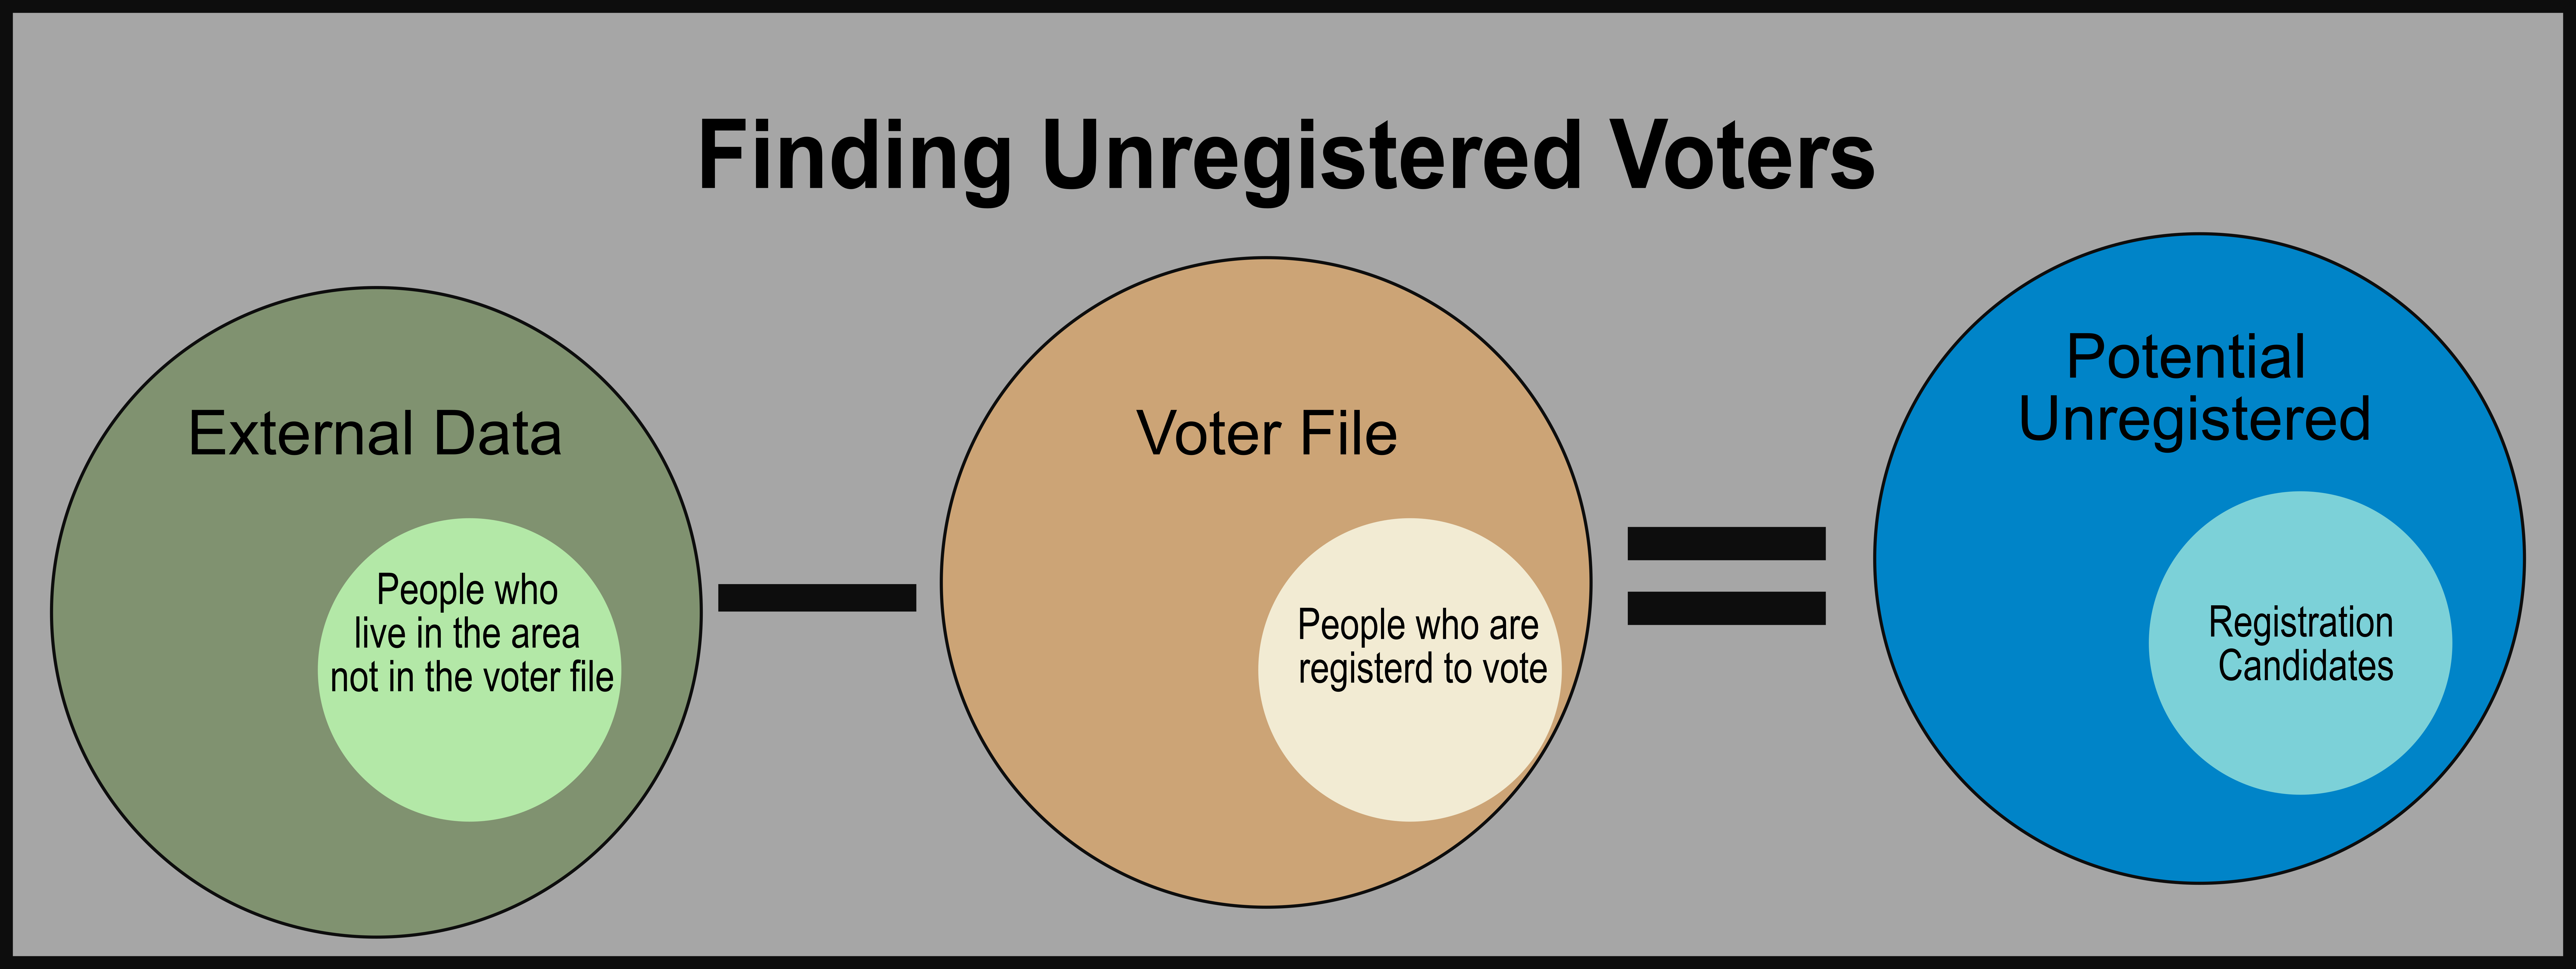 How to find unregistered voters by subtracting known voters from a list of the addresses in an area.